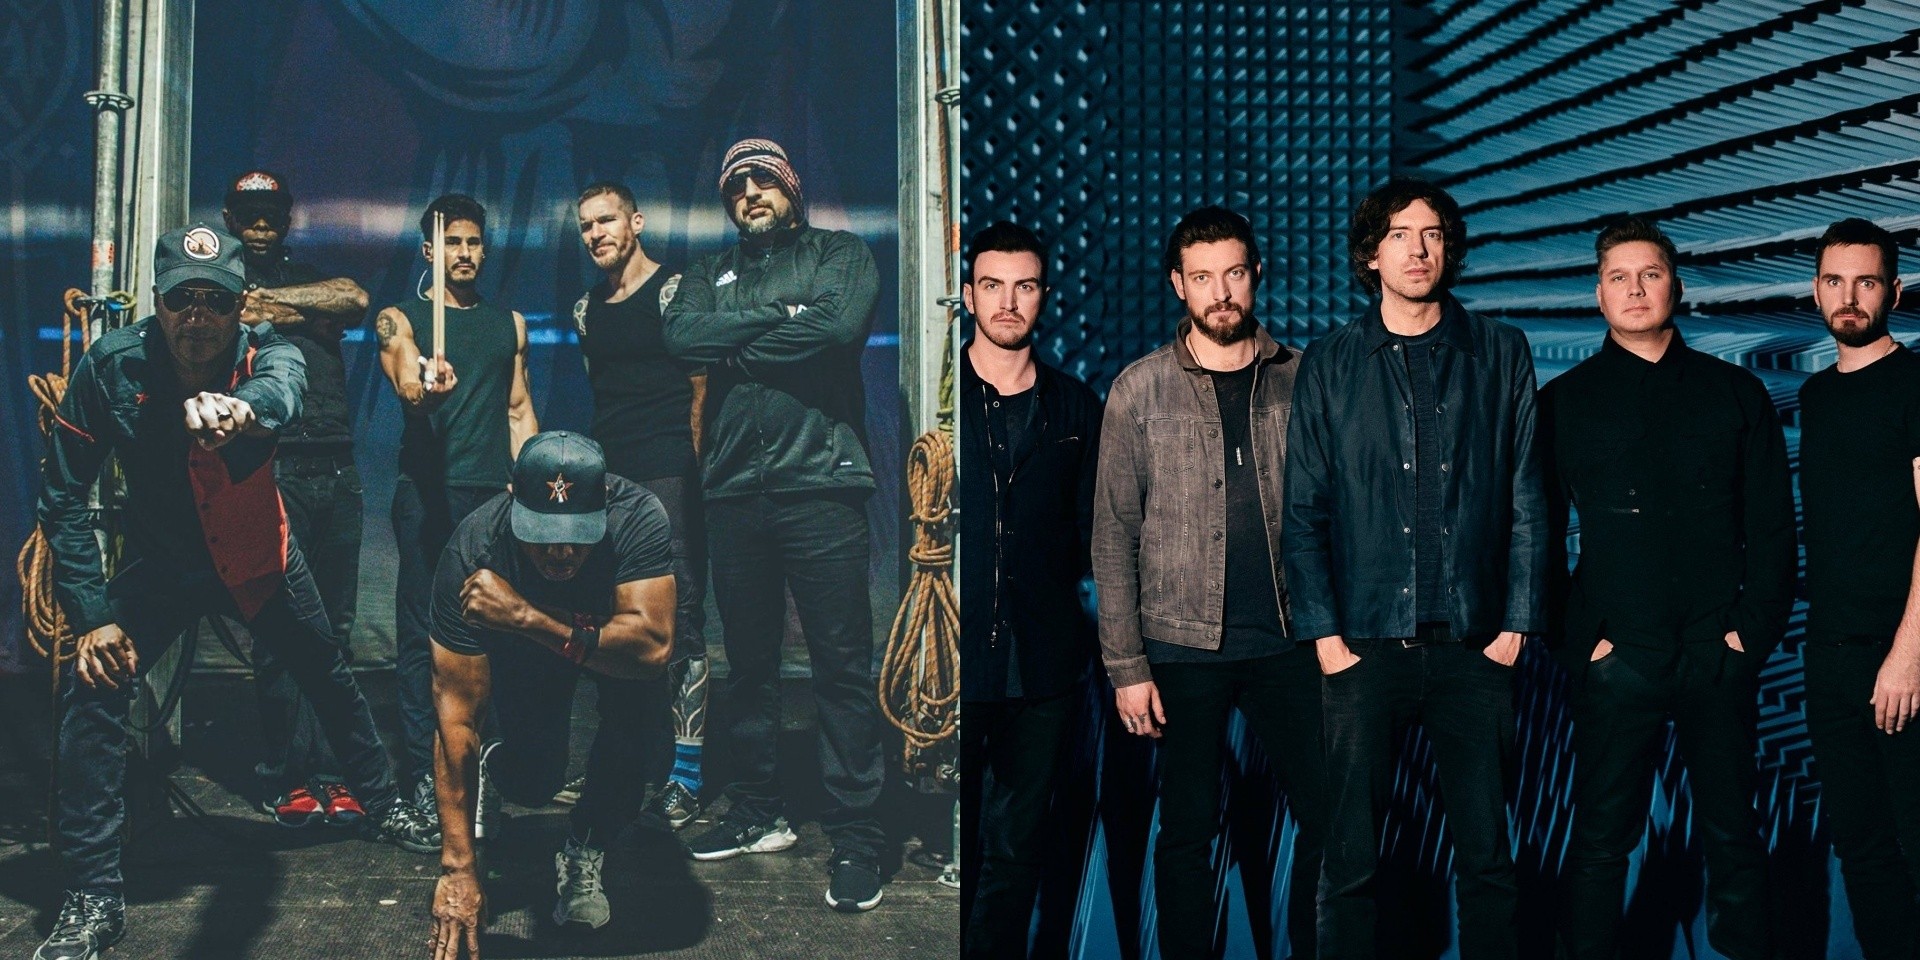 Hodgepodge Superfest 2019 announces Phase 1 line-up – Prophets of Rage, Snow Patrol and more confirmed